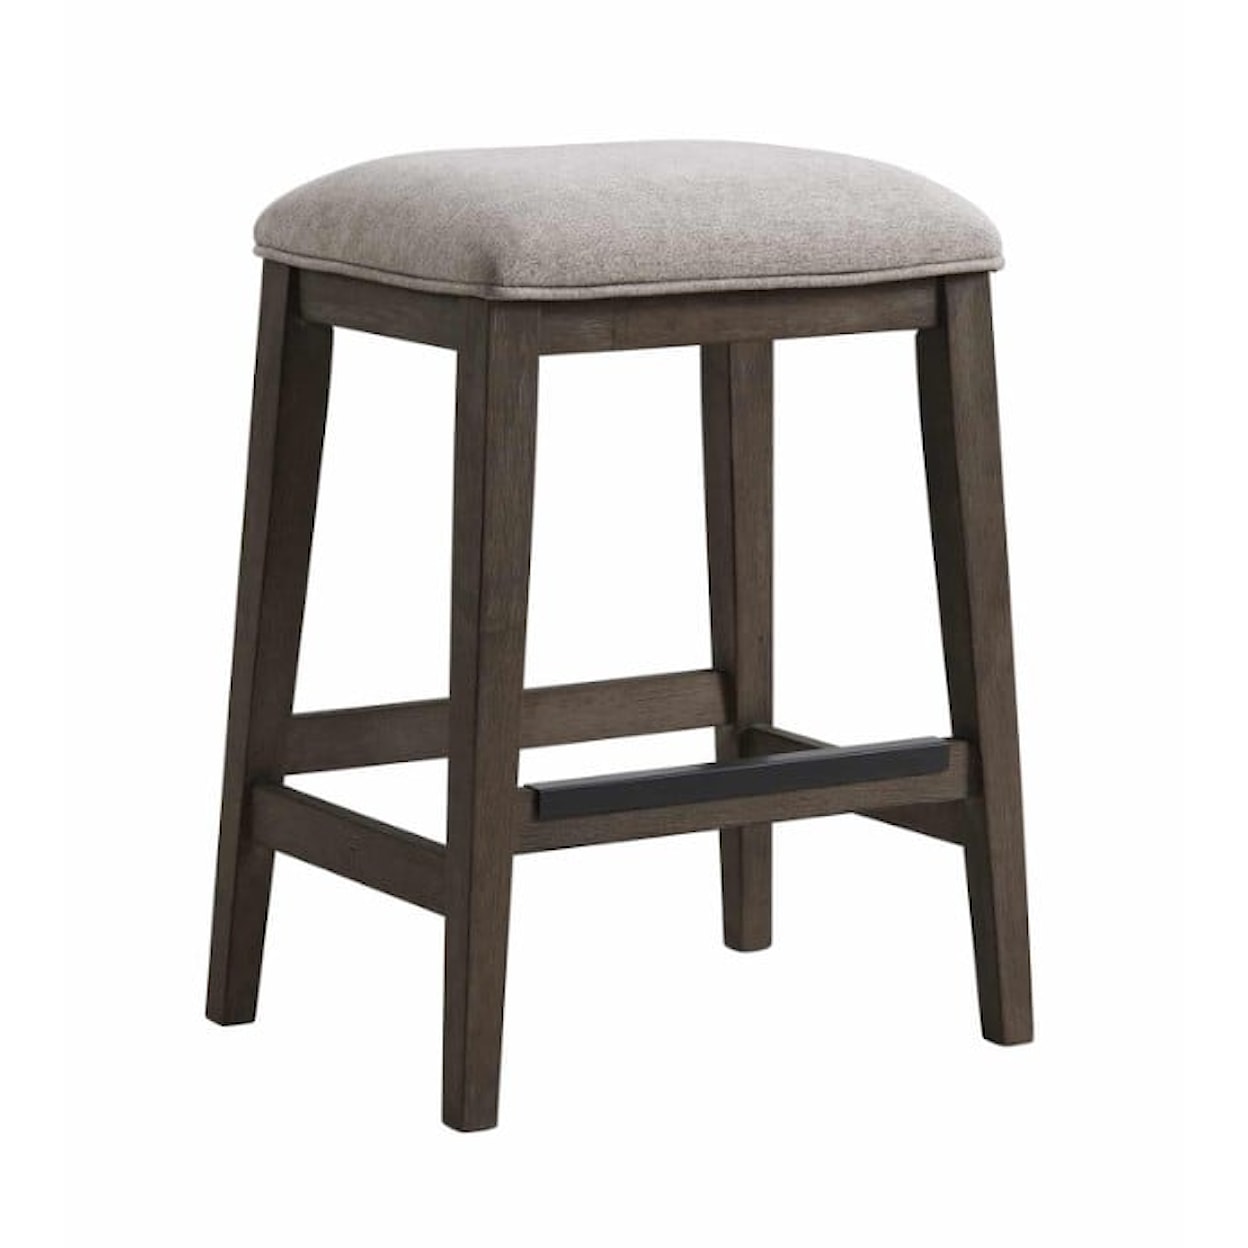 Intercon Hearst Upholstered Counter-Height Stool